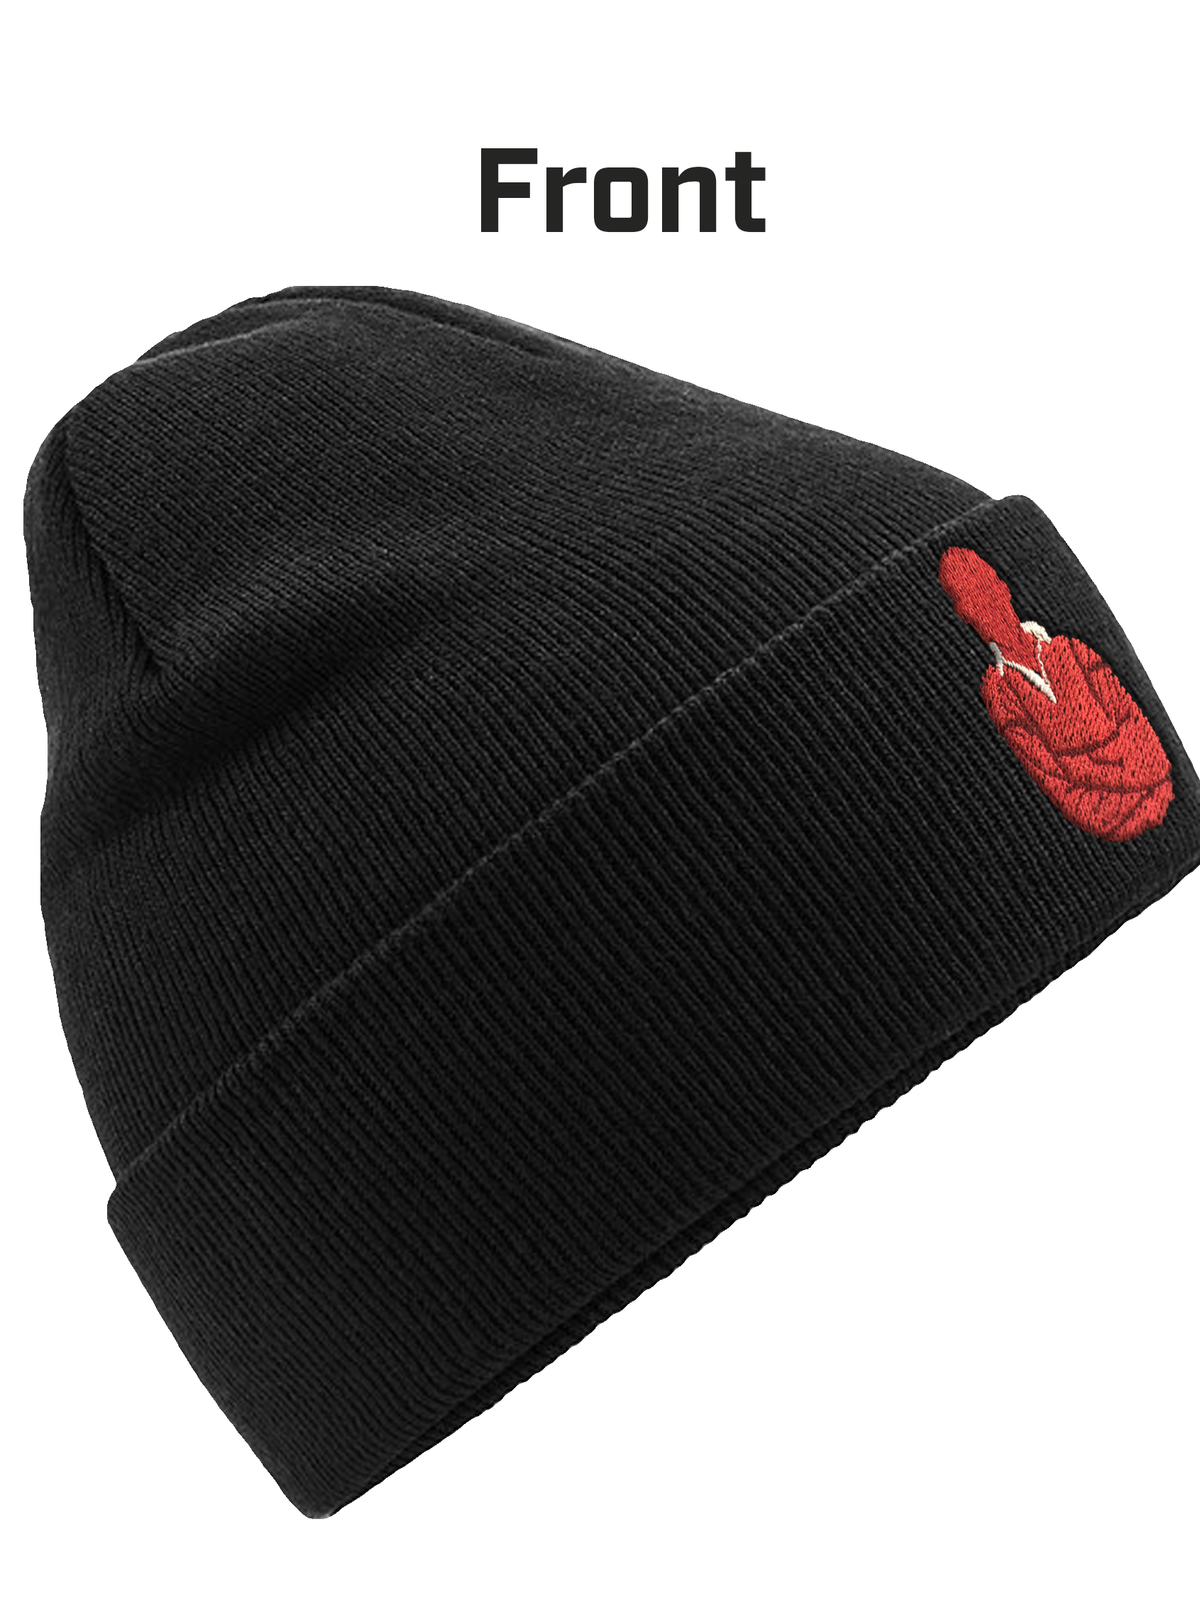 Duncan Edwards Embroidered Beanie